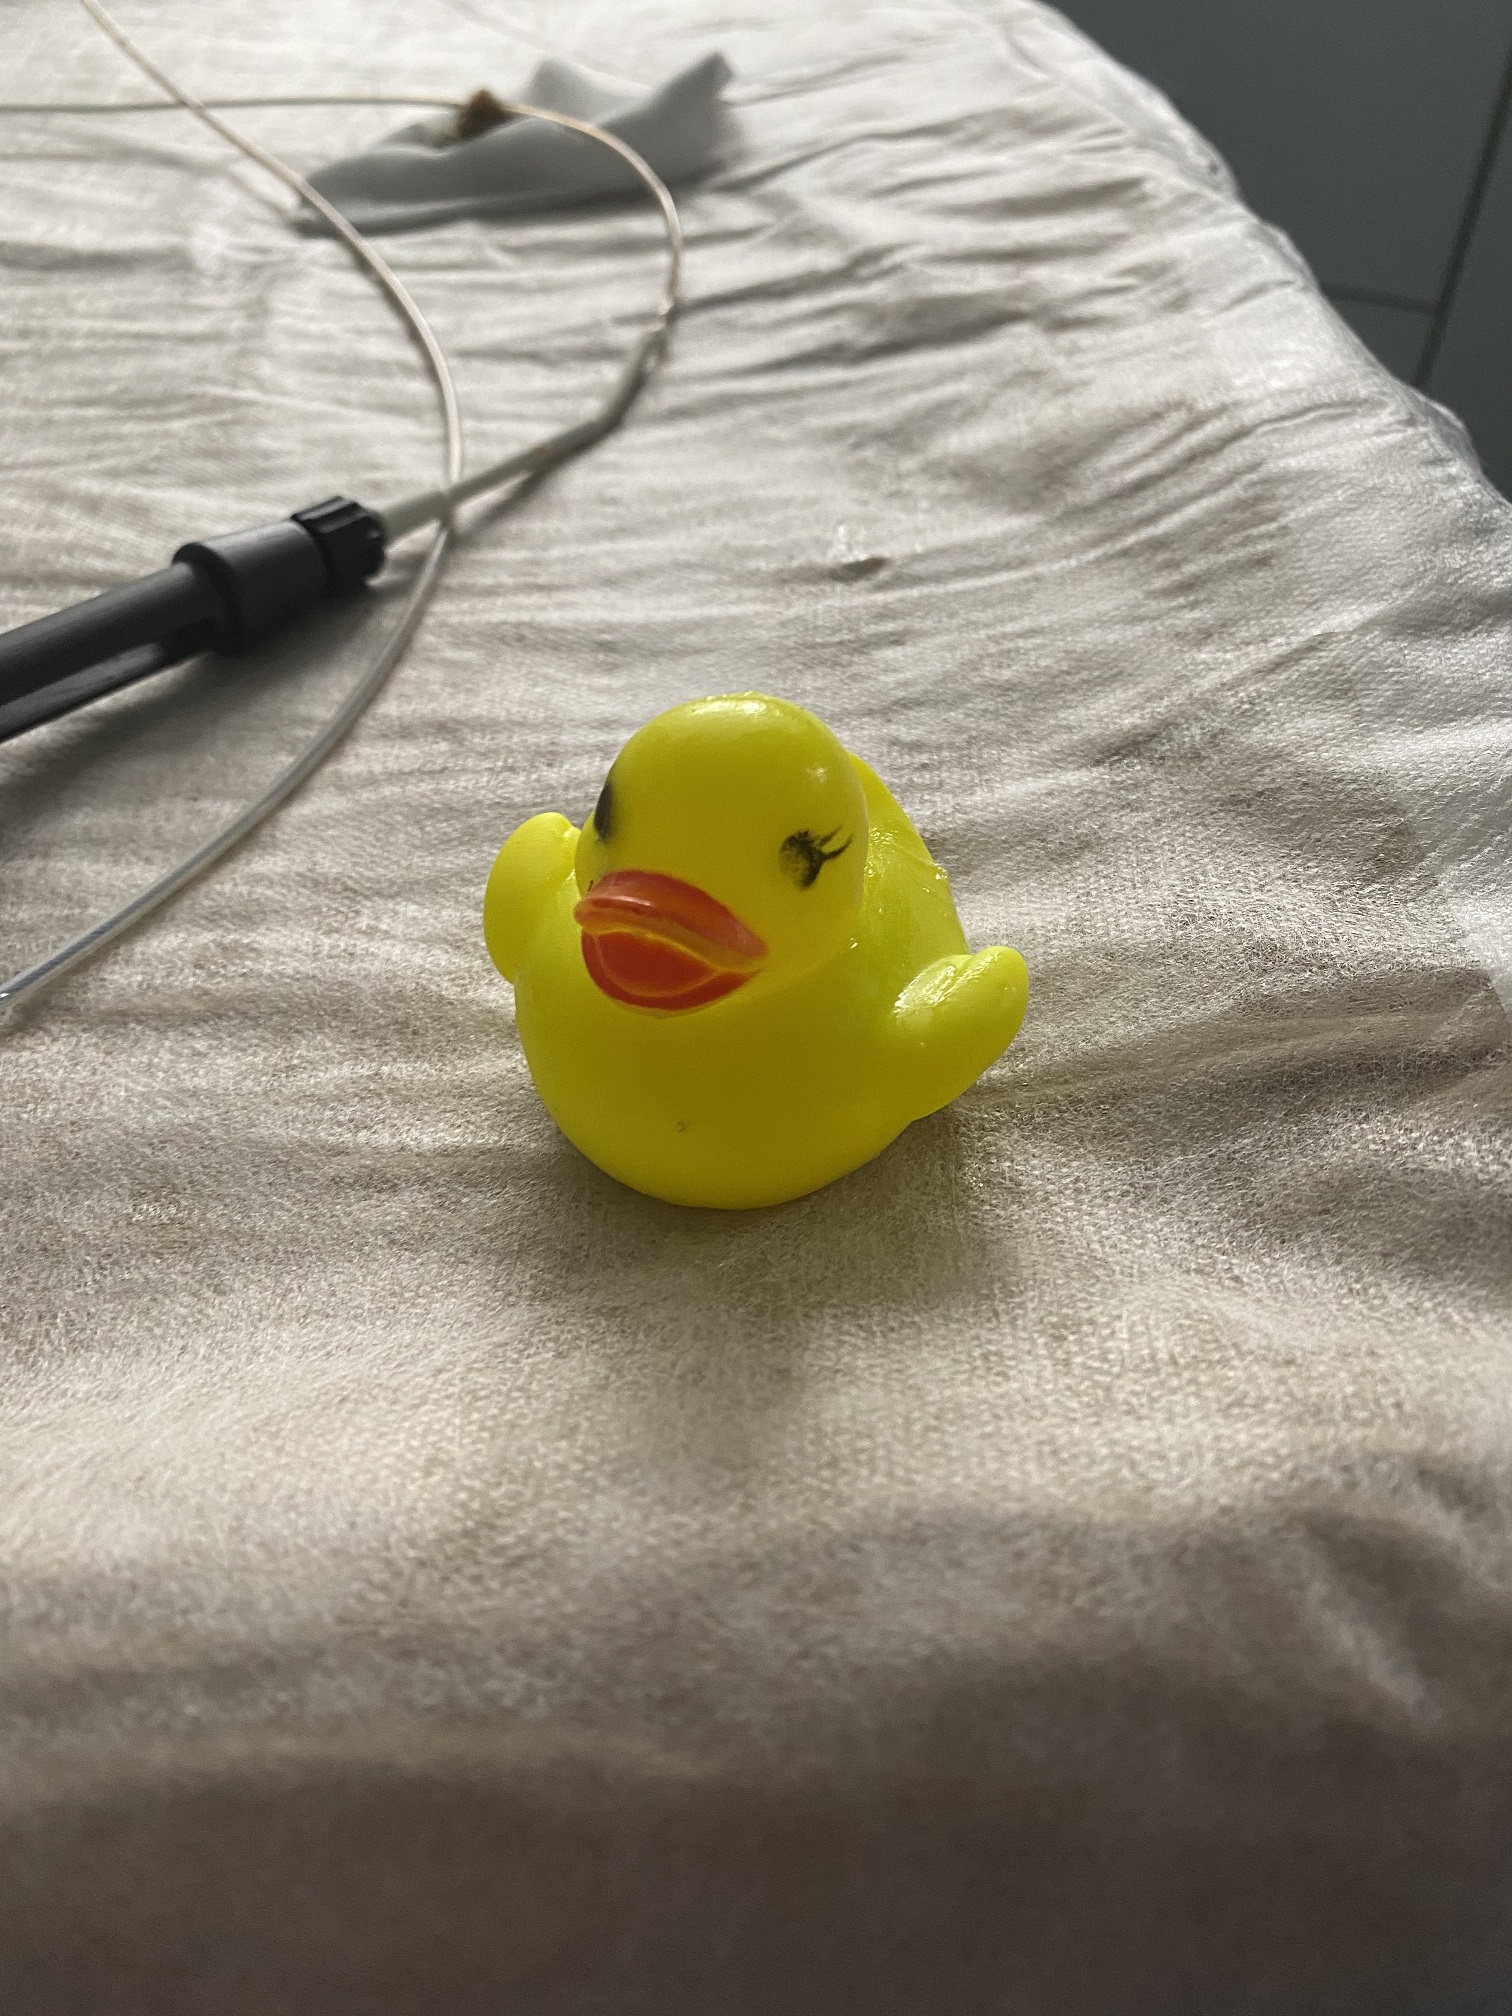 The rubber duck after being hooked at Pride in Derby after being swallowed by a dog